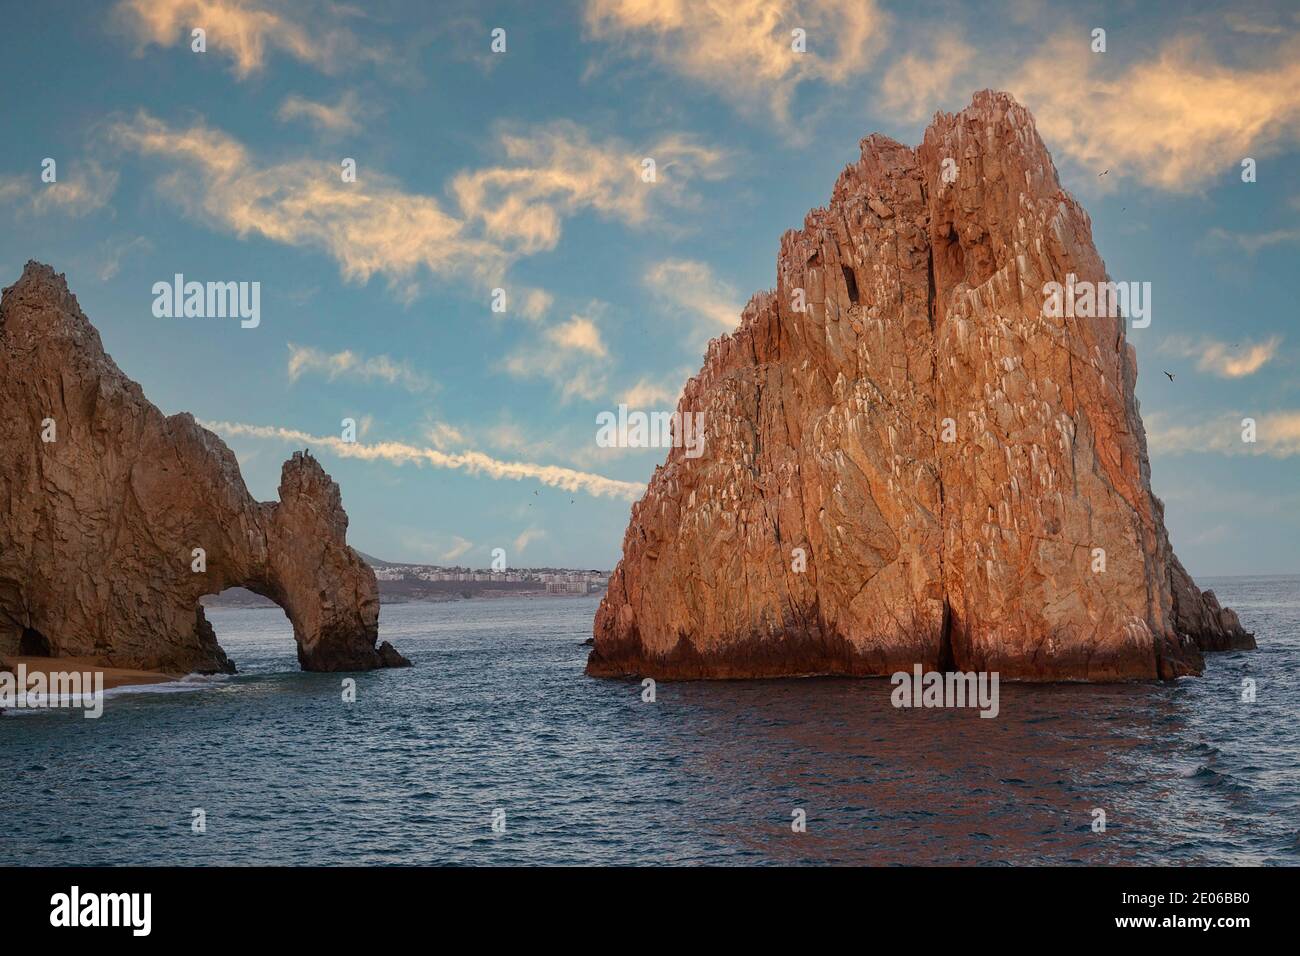 Sun setting over the Sea of Cortez at Lands End in Cabo San Lucas, Mexico Stock Photo